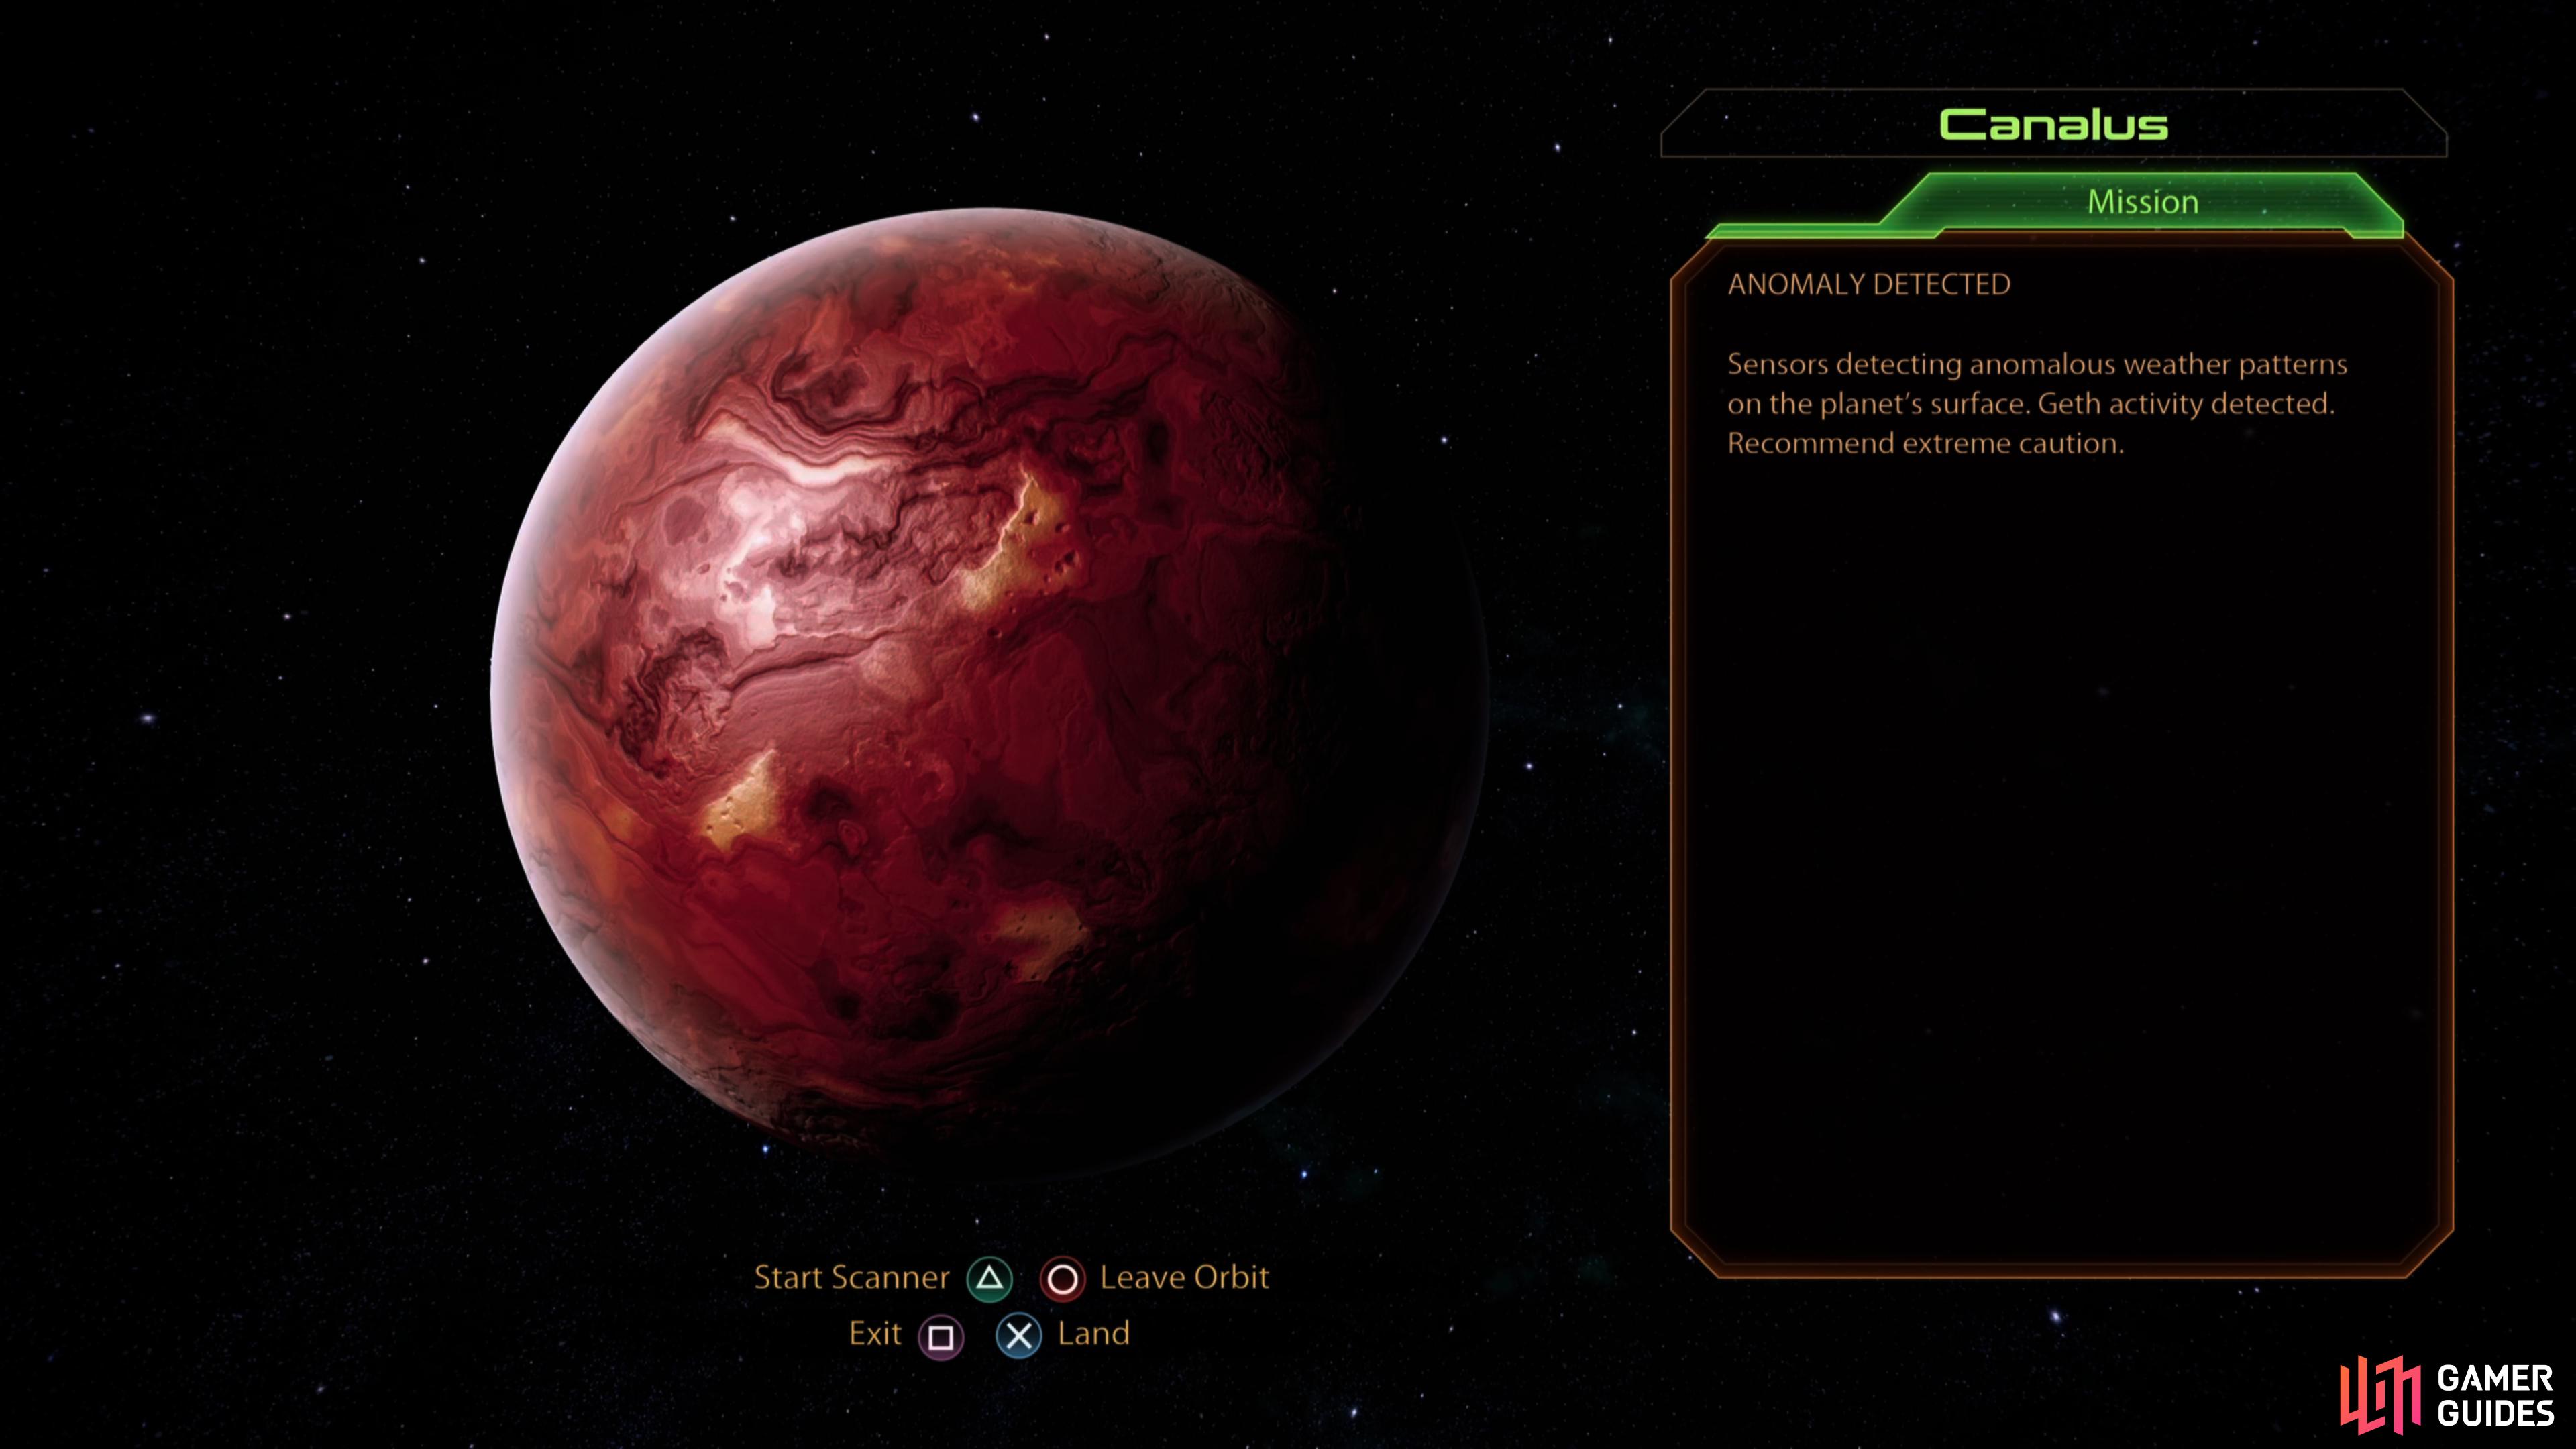 The assignment "Anomalous Weather Detected" takes place on Canalus.